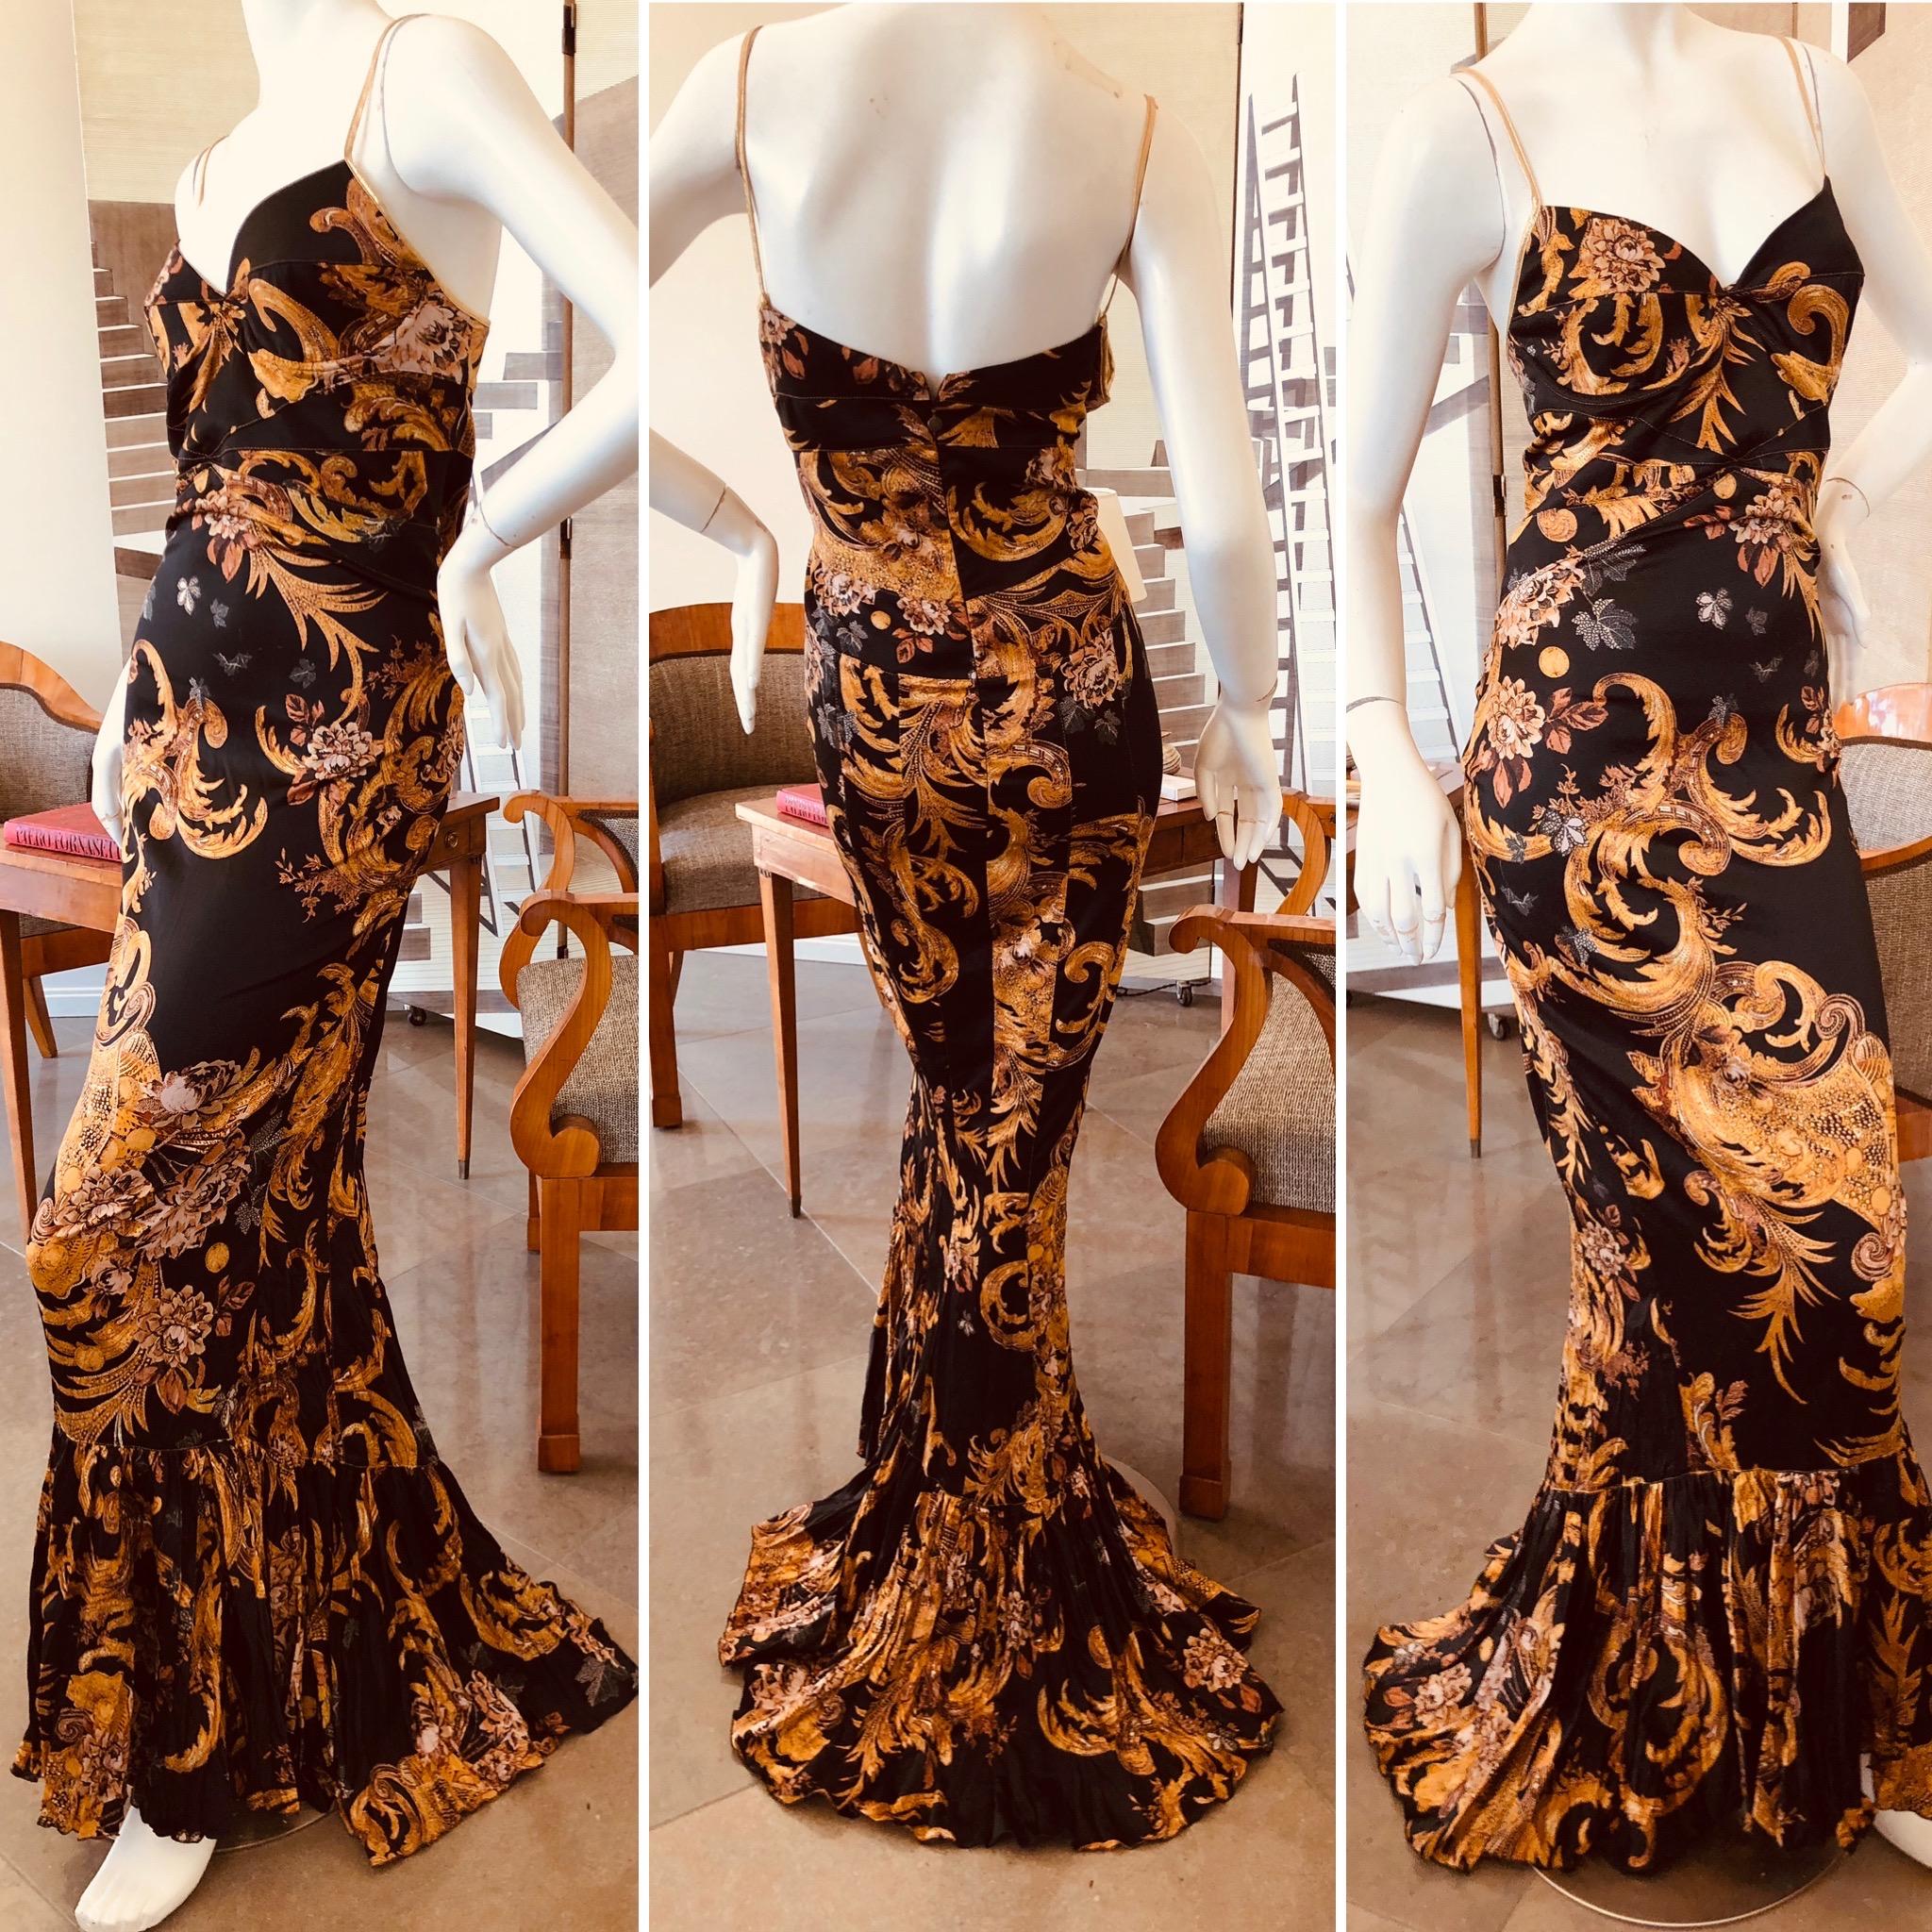 Roberto Cavalli Elegant Fishtail Mermaid Back Evening Dress.
This is so pretty, with a rich gold print, and mermaid fishtail back.
Size 46, and runs large, please check the measurements, there is a LOT of stretch.
Bust 38